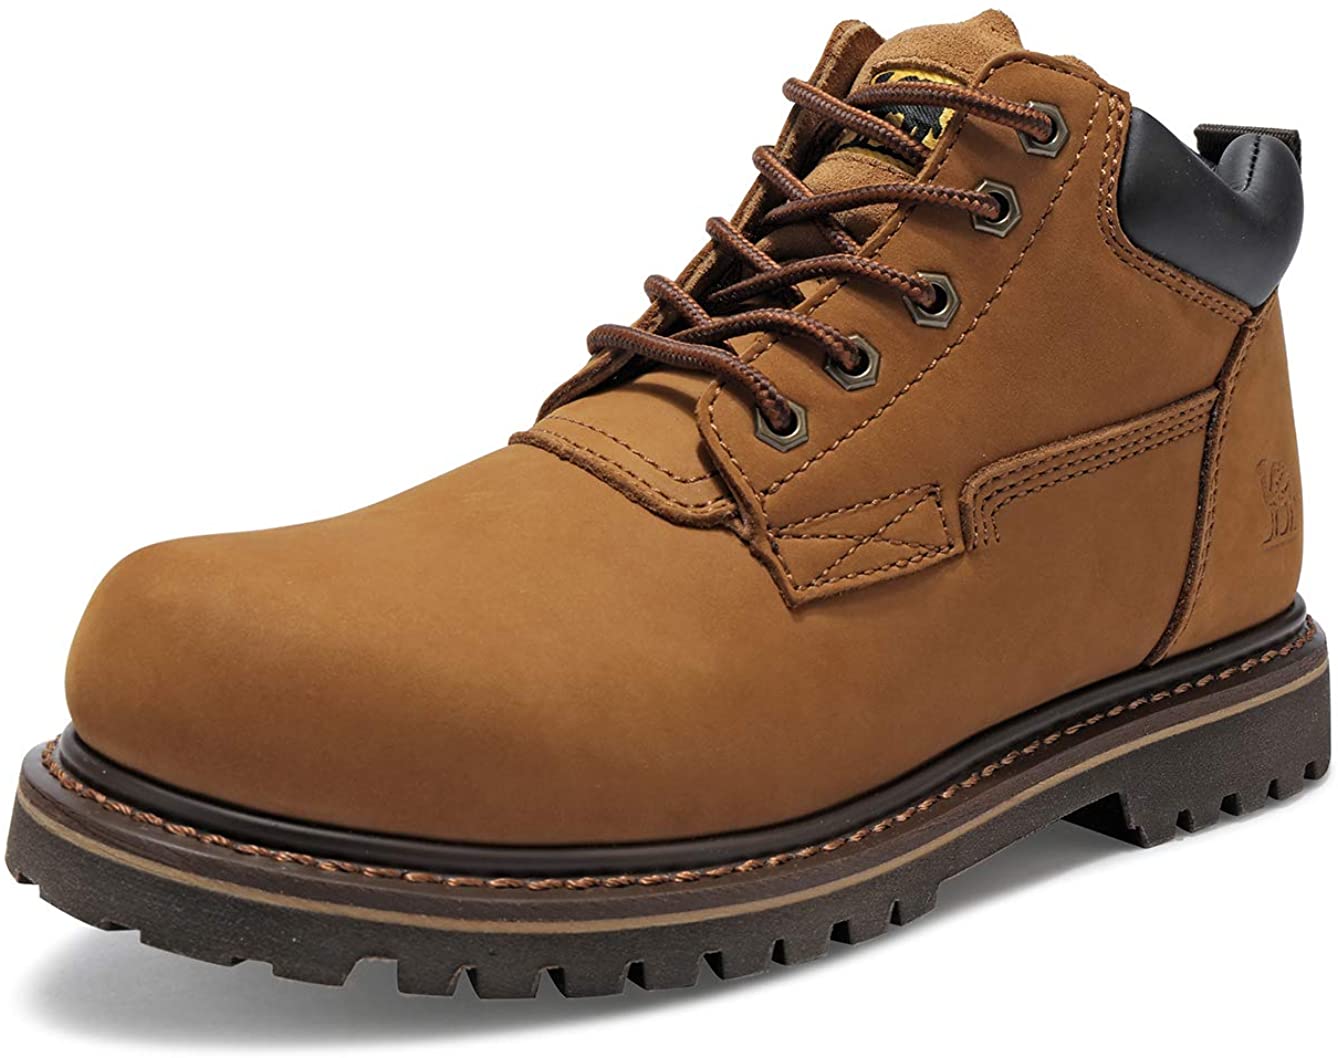 CAMEL CROWN 4 Men's Work Boots Lace Up Insulated Premium Leather soft Comfortable Ankle Boots for Men 